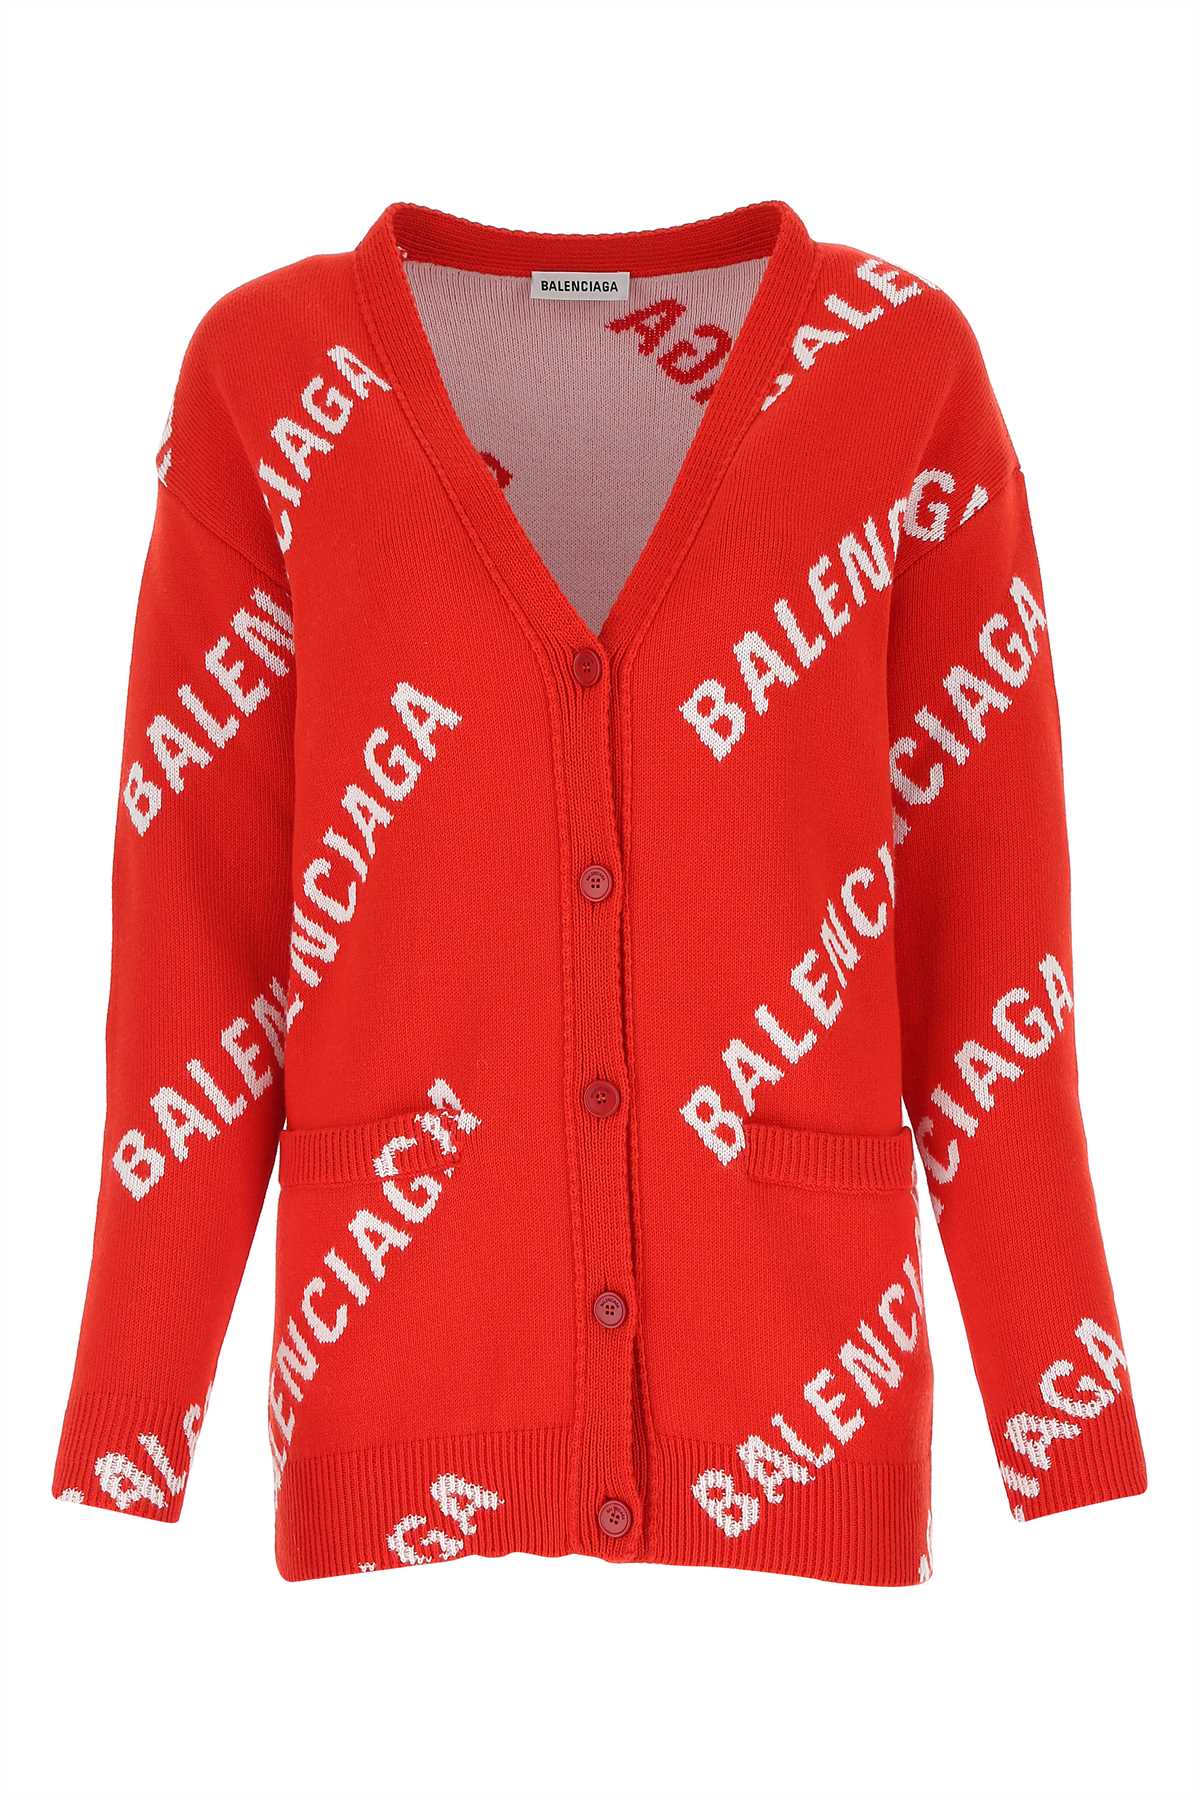 Balenciaga Embroidered Stretch Cotton Blend Oversize Cardigan In Redwhite